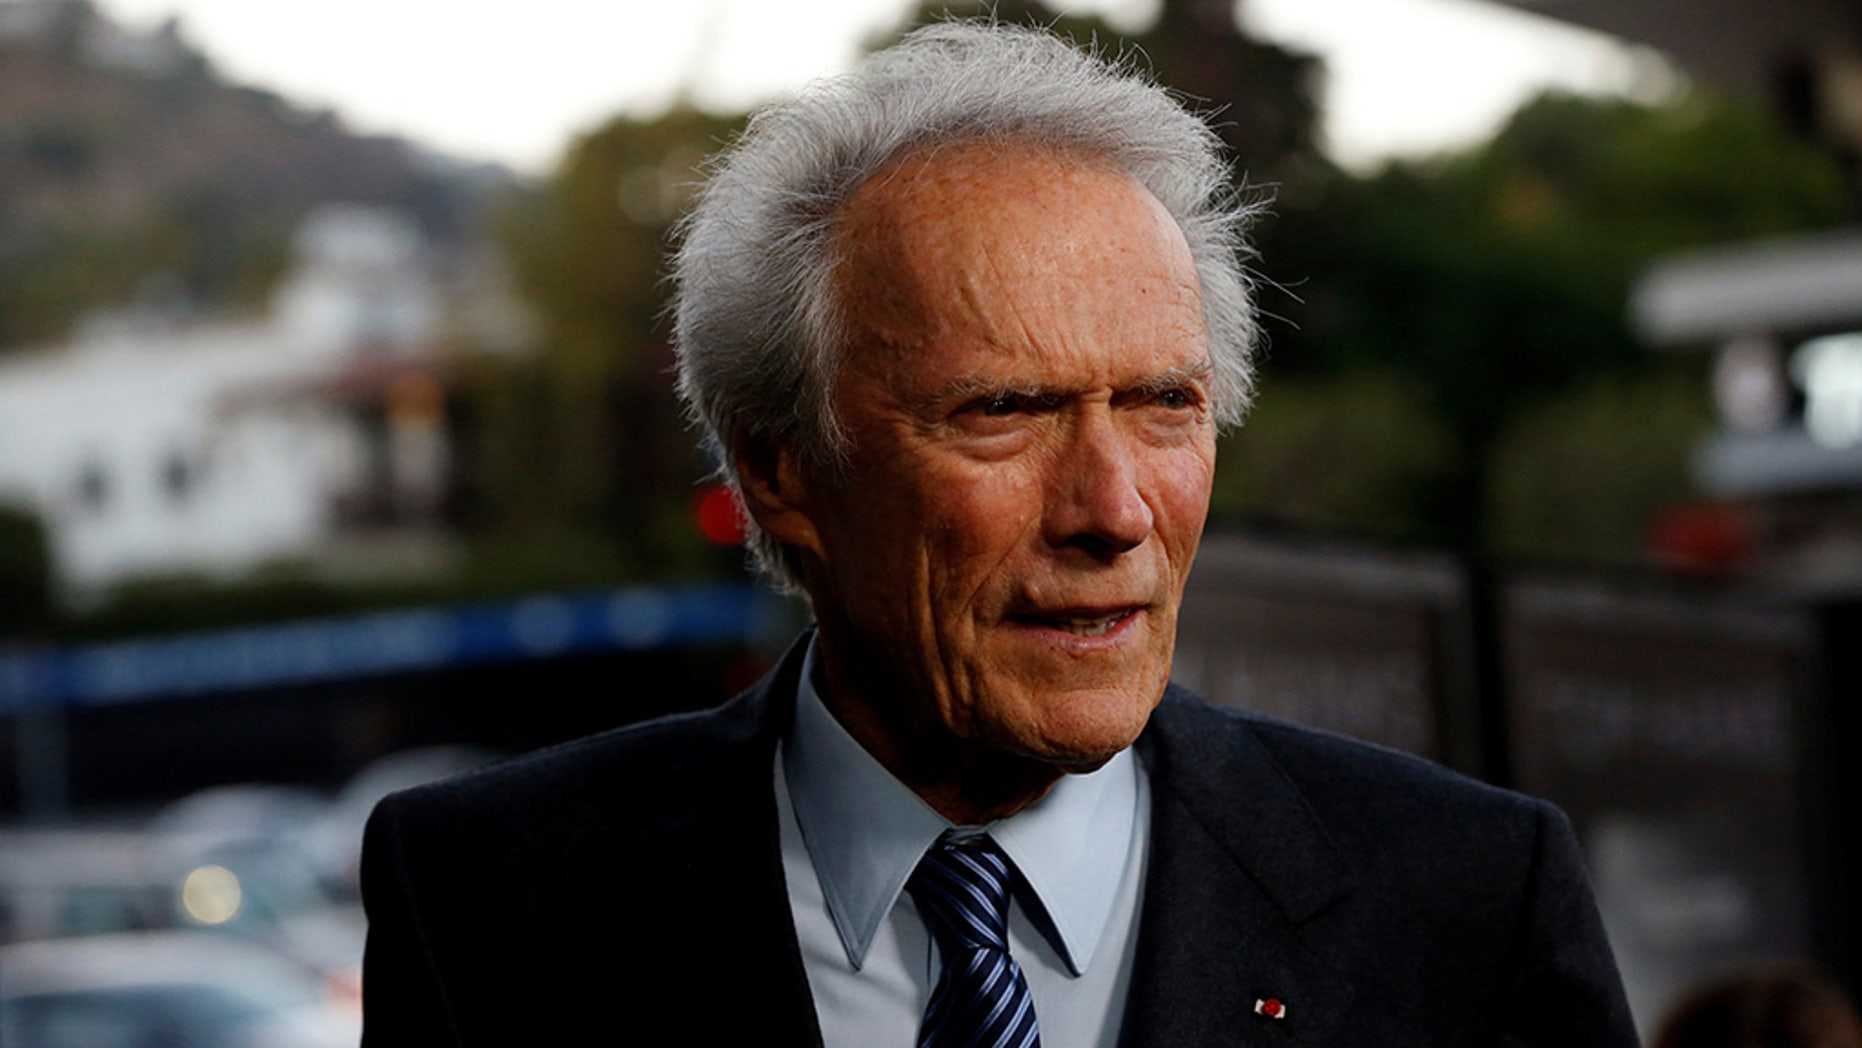 Clint Eastwood sues medical company over patents, report says Fox News